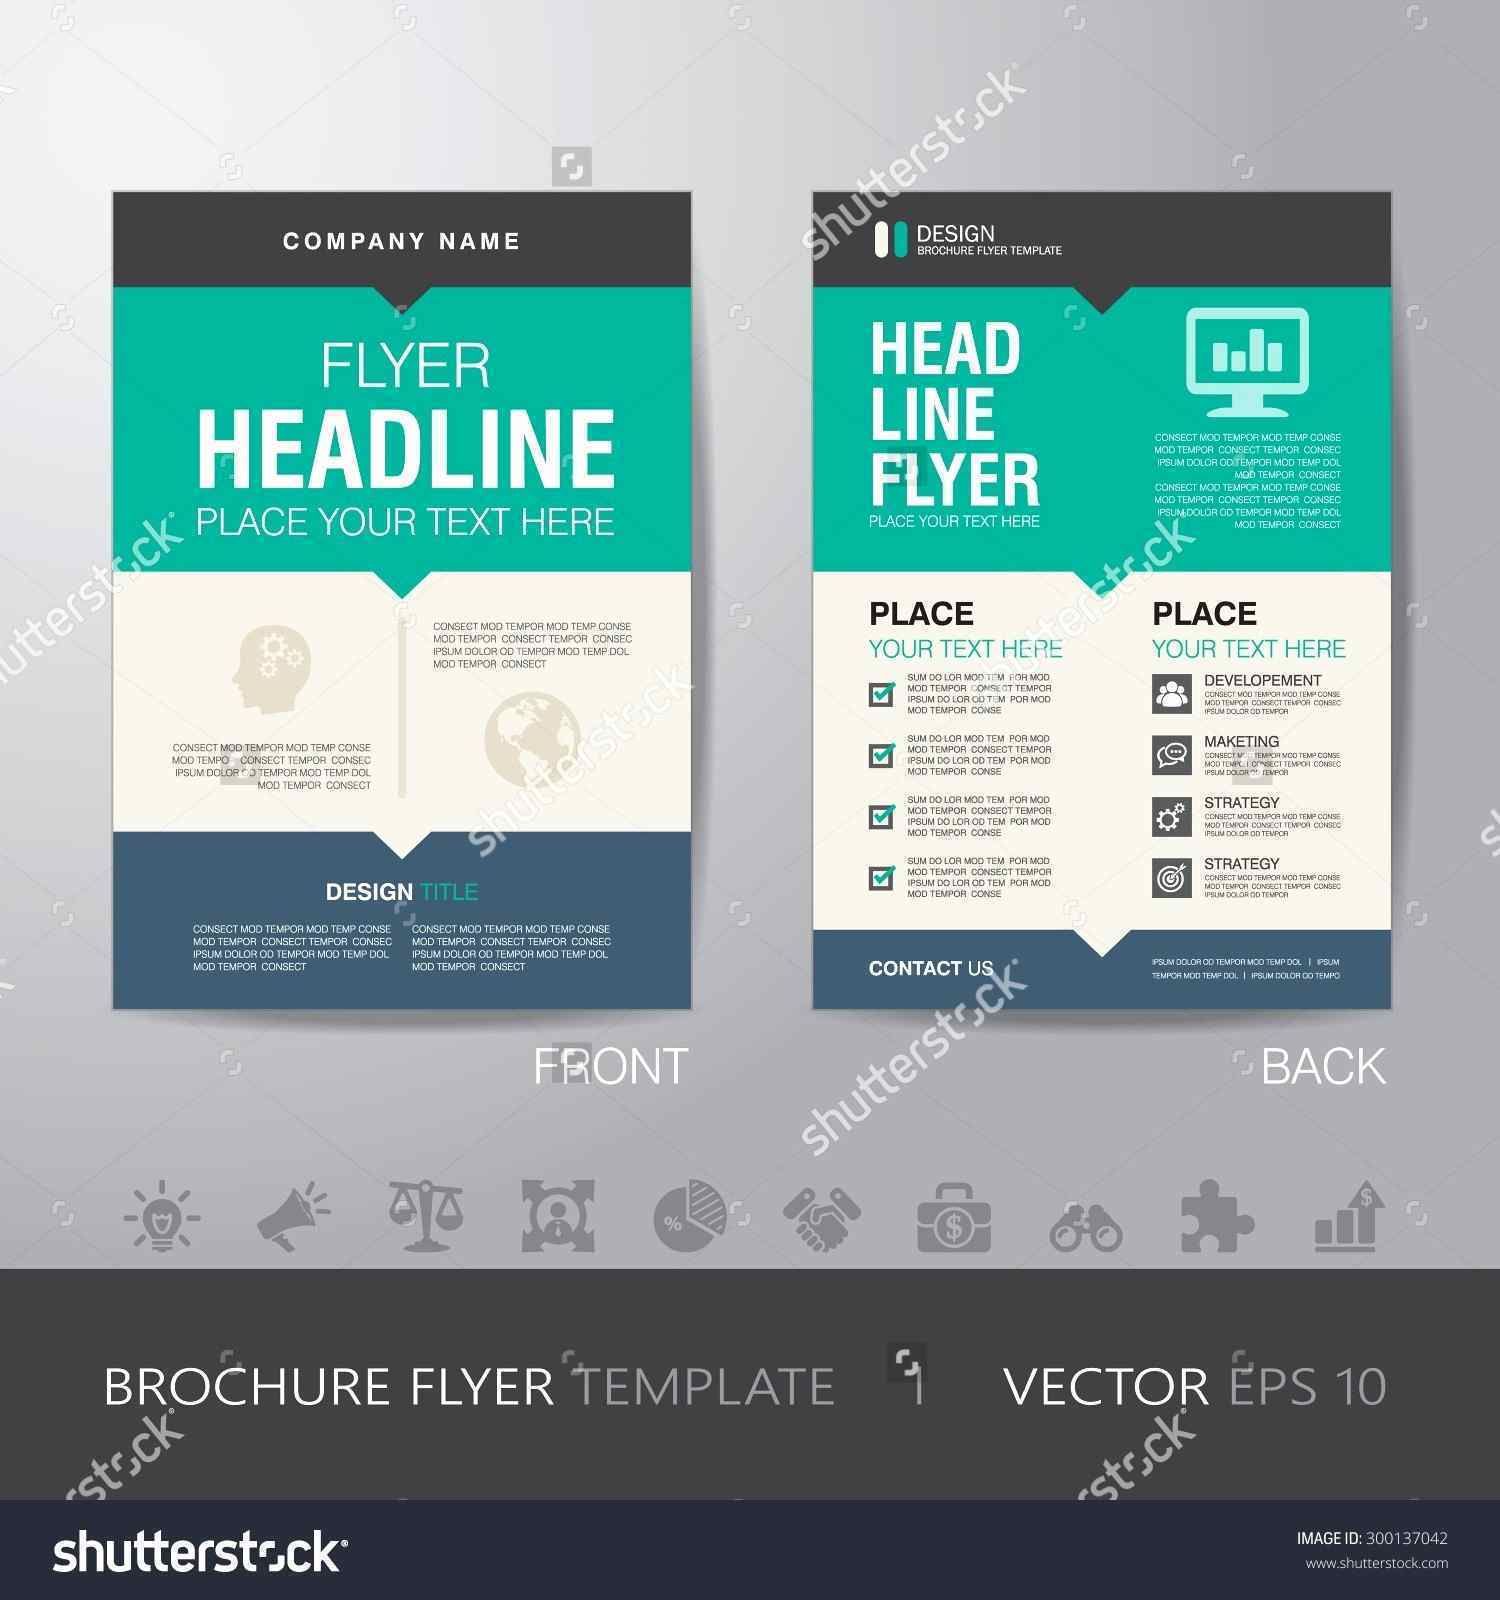 58 Customize Our Free Free Business Flyer Templates For Word Formating for Free Business Flyer Templates For Word